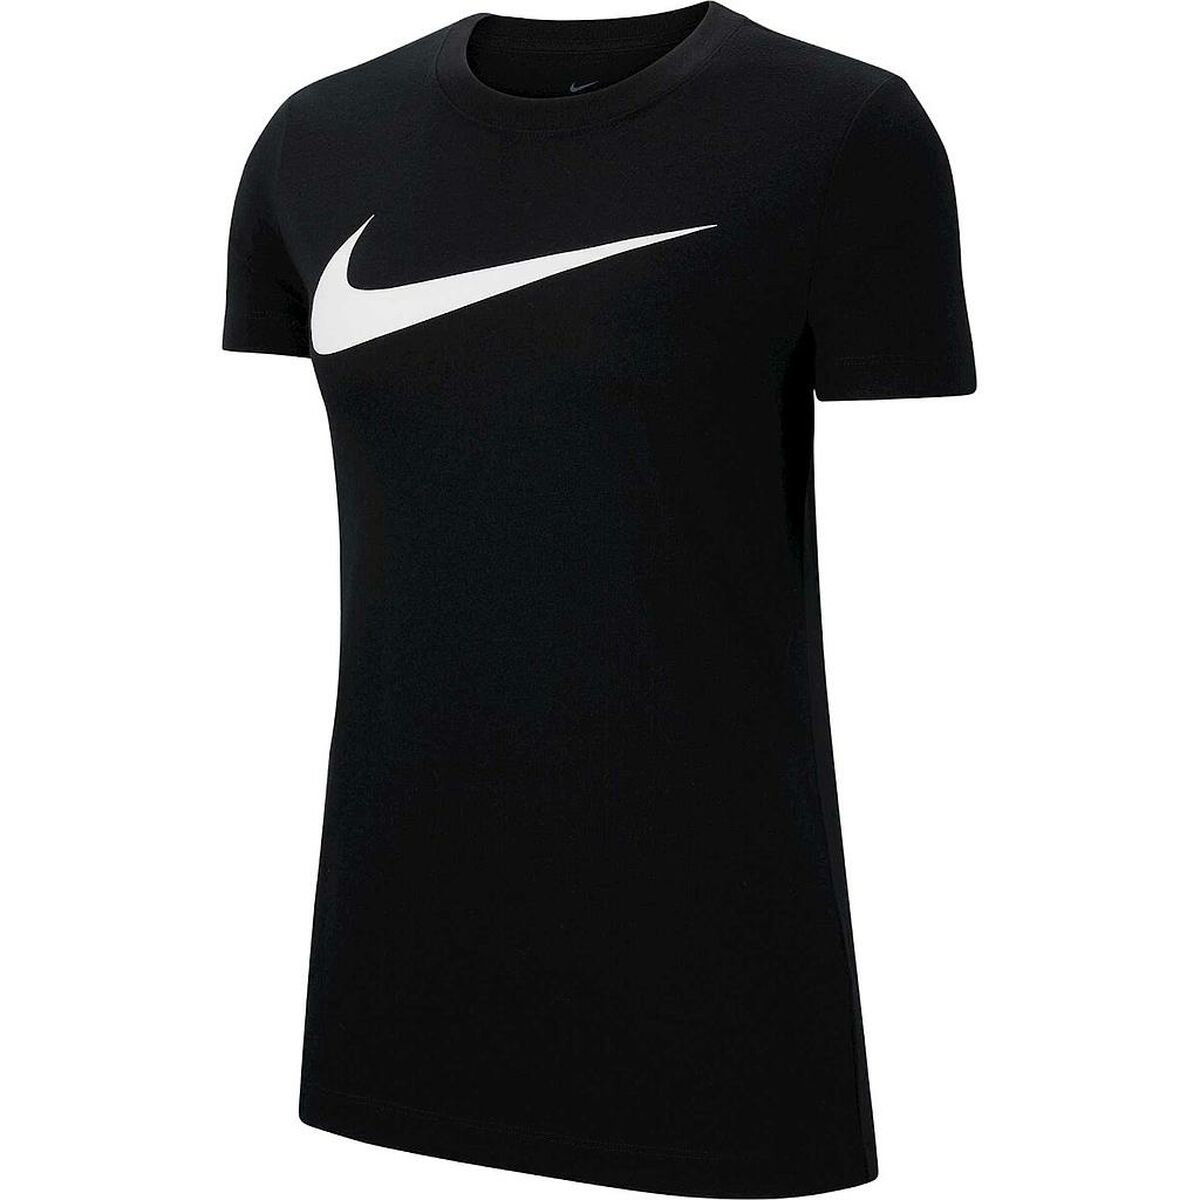 Women’s Short Sleeve T-Shirt DF PARK20 SS TEE CW6967 Nike Black-Sports | Fitness > Sports material and equipment > Sports t-shirts-Nike-Urbanheer